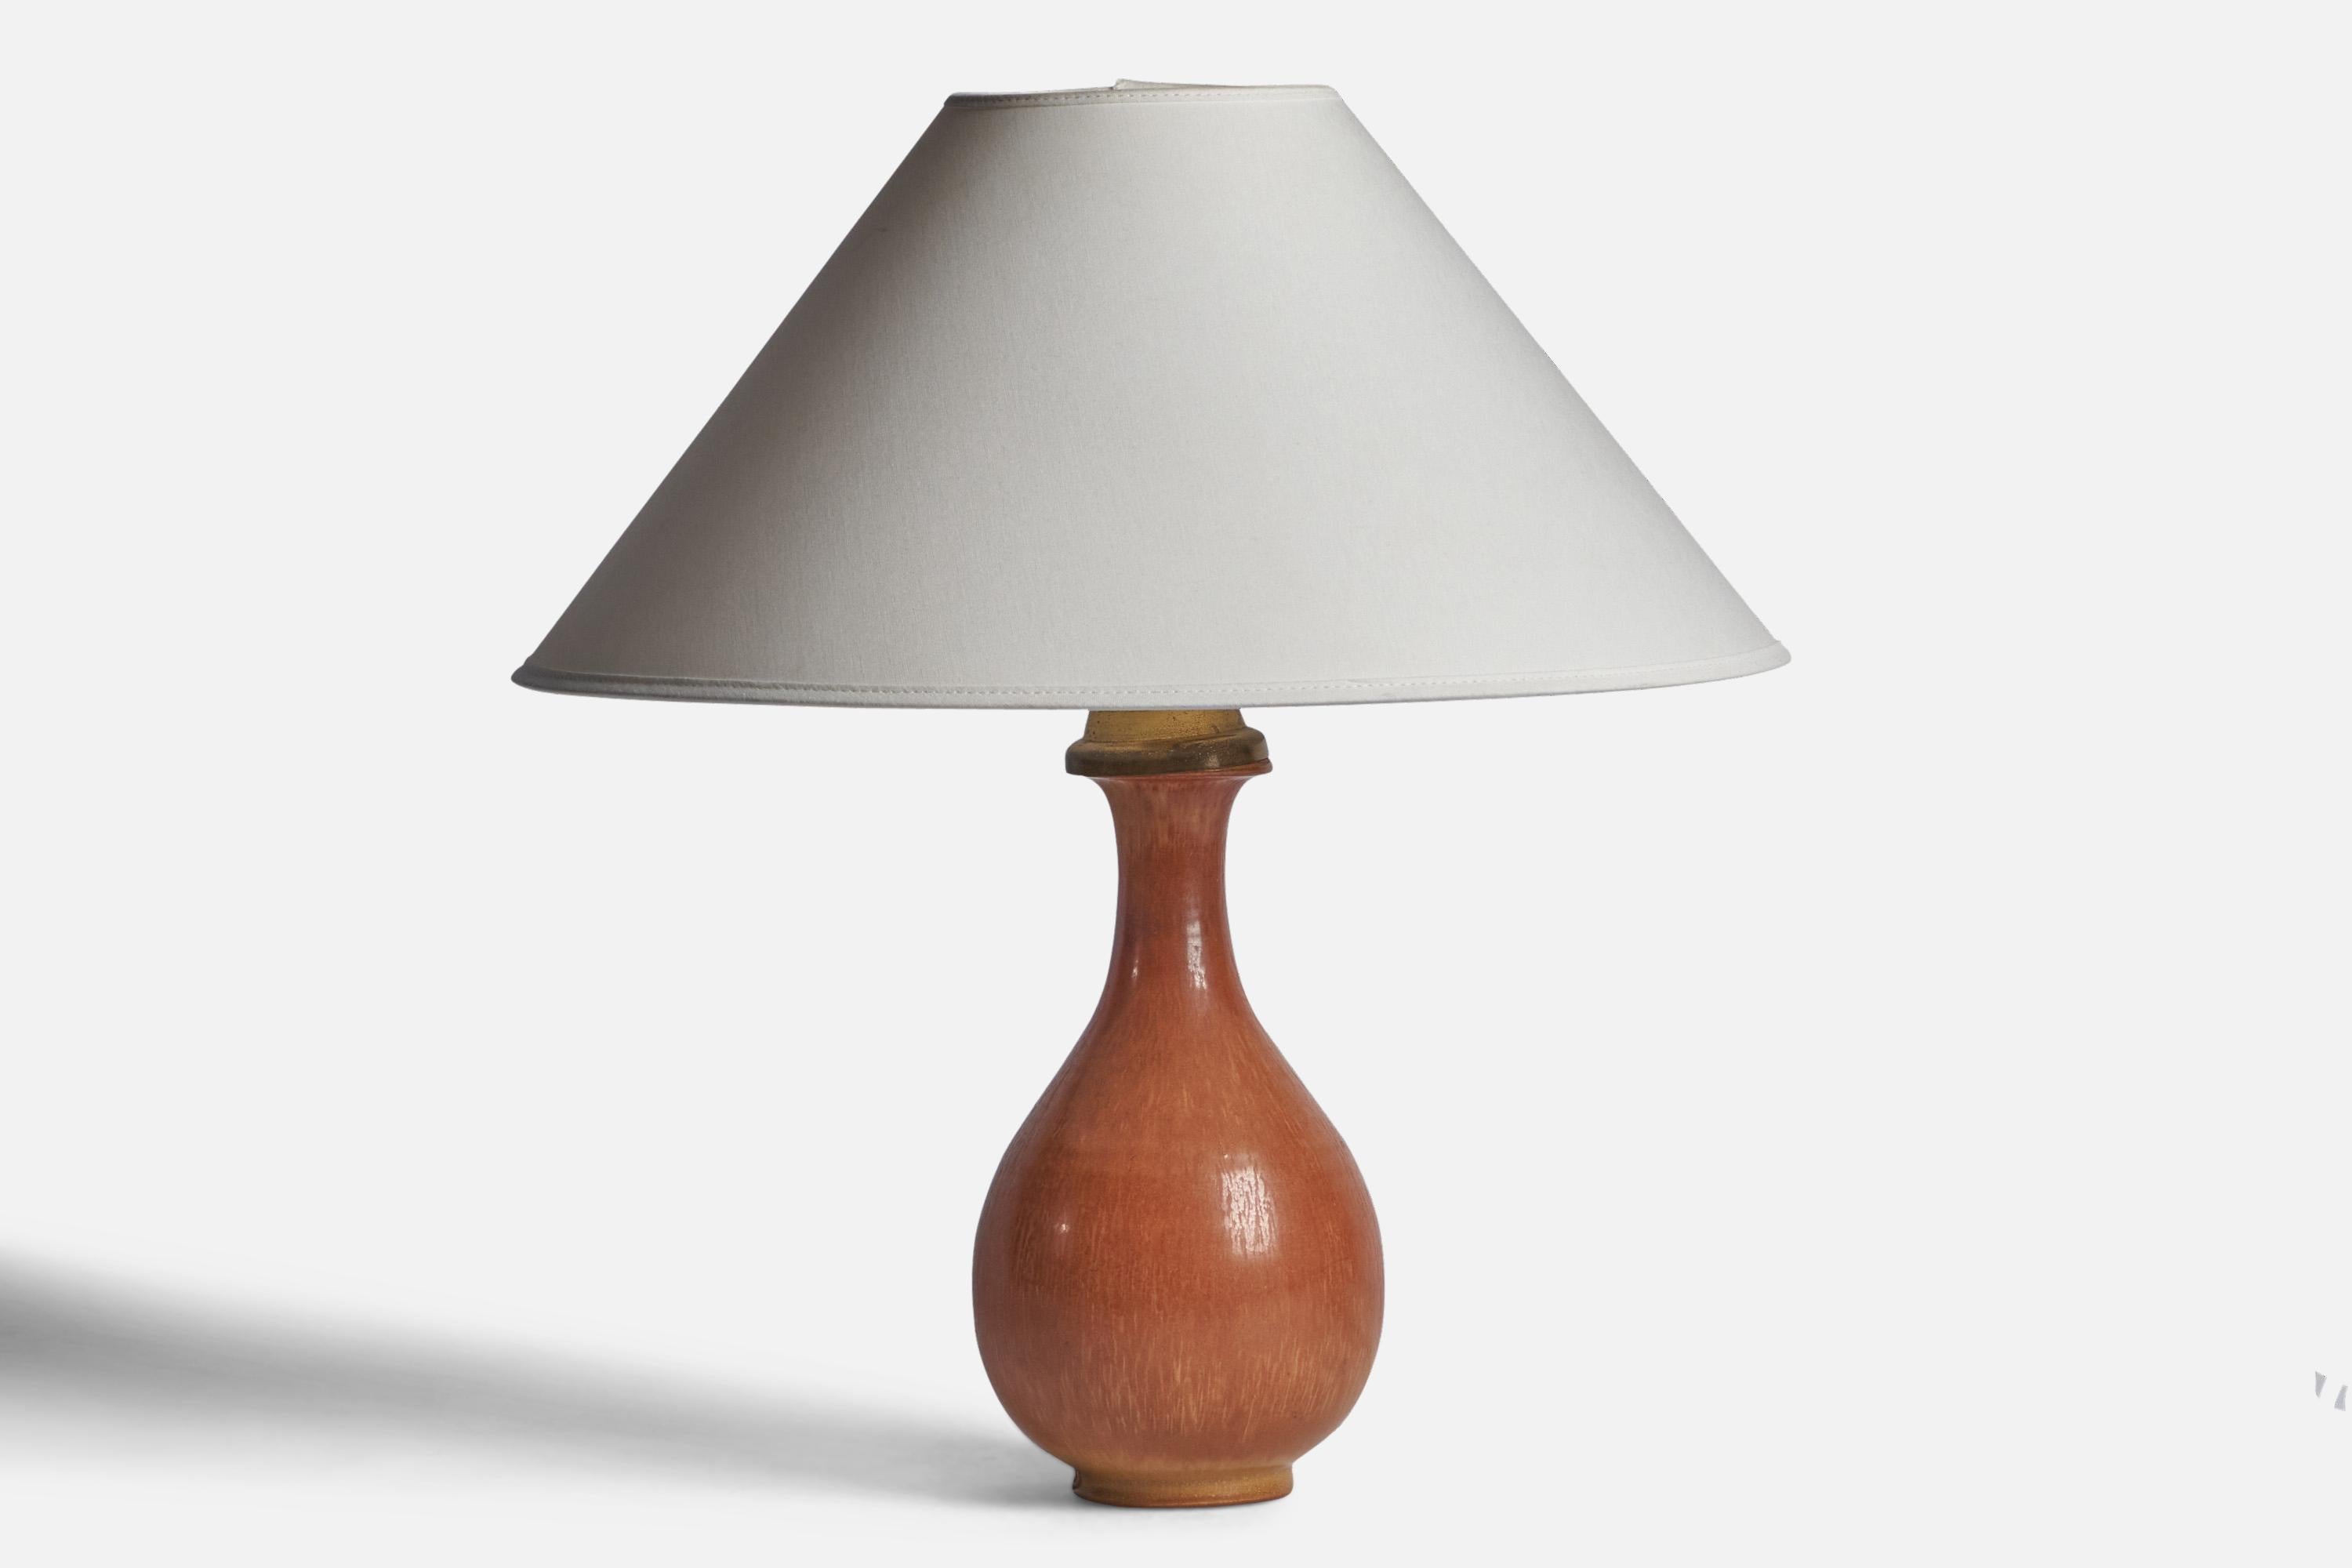 A brown-glazed stoneware table lamp designed by Gunnar Nylund and produced by Rörstrand, Sweden, 1940s.

Dimensions of Lamp (inches): 13.25” H x 5.2” Diameter
Dimensions of Shade (inches): 4.5” Top Diameter x 16” Bottom Diameter x 7.15” H